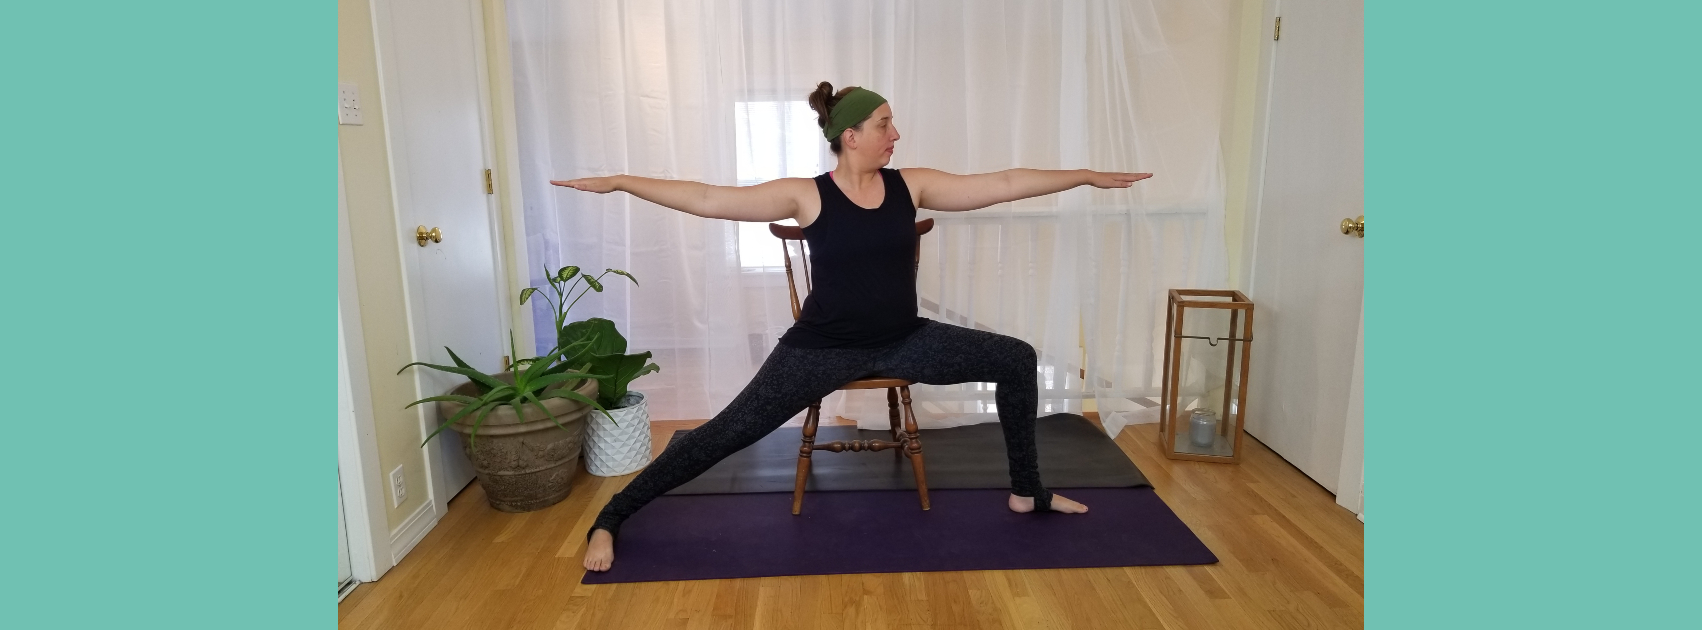 A Ten Minute Chair Yoga Sequence for Beginners - Kindpact